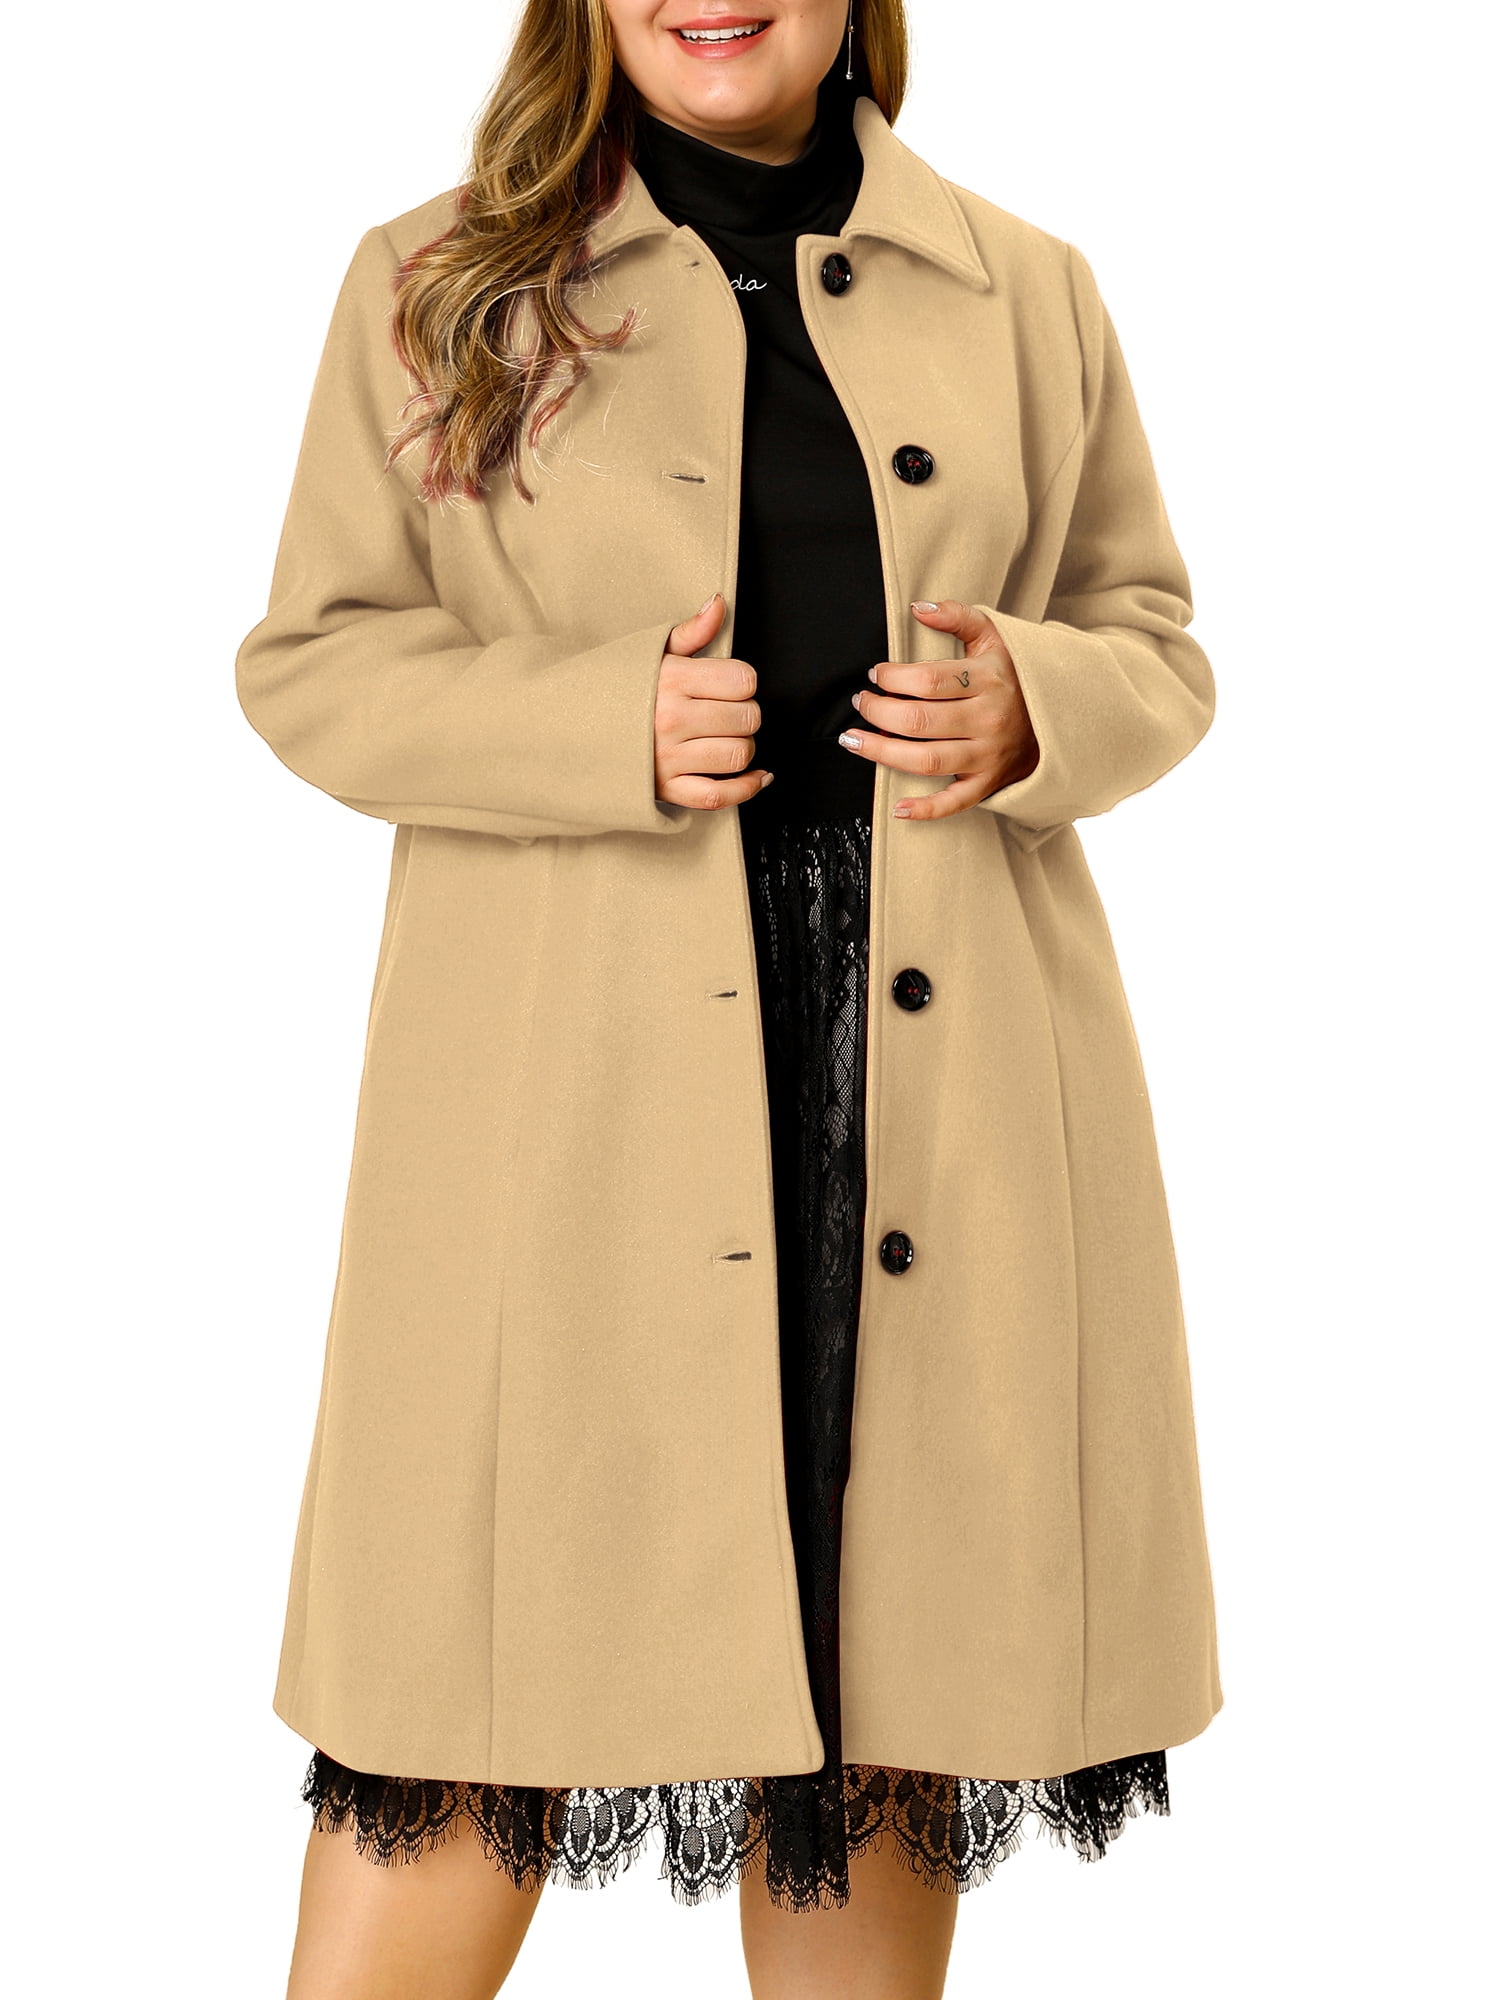 Agnes Orinda Women's Plus Size Winter Outfits Utility Jacket Belted ...